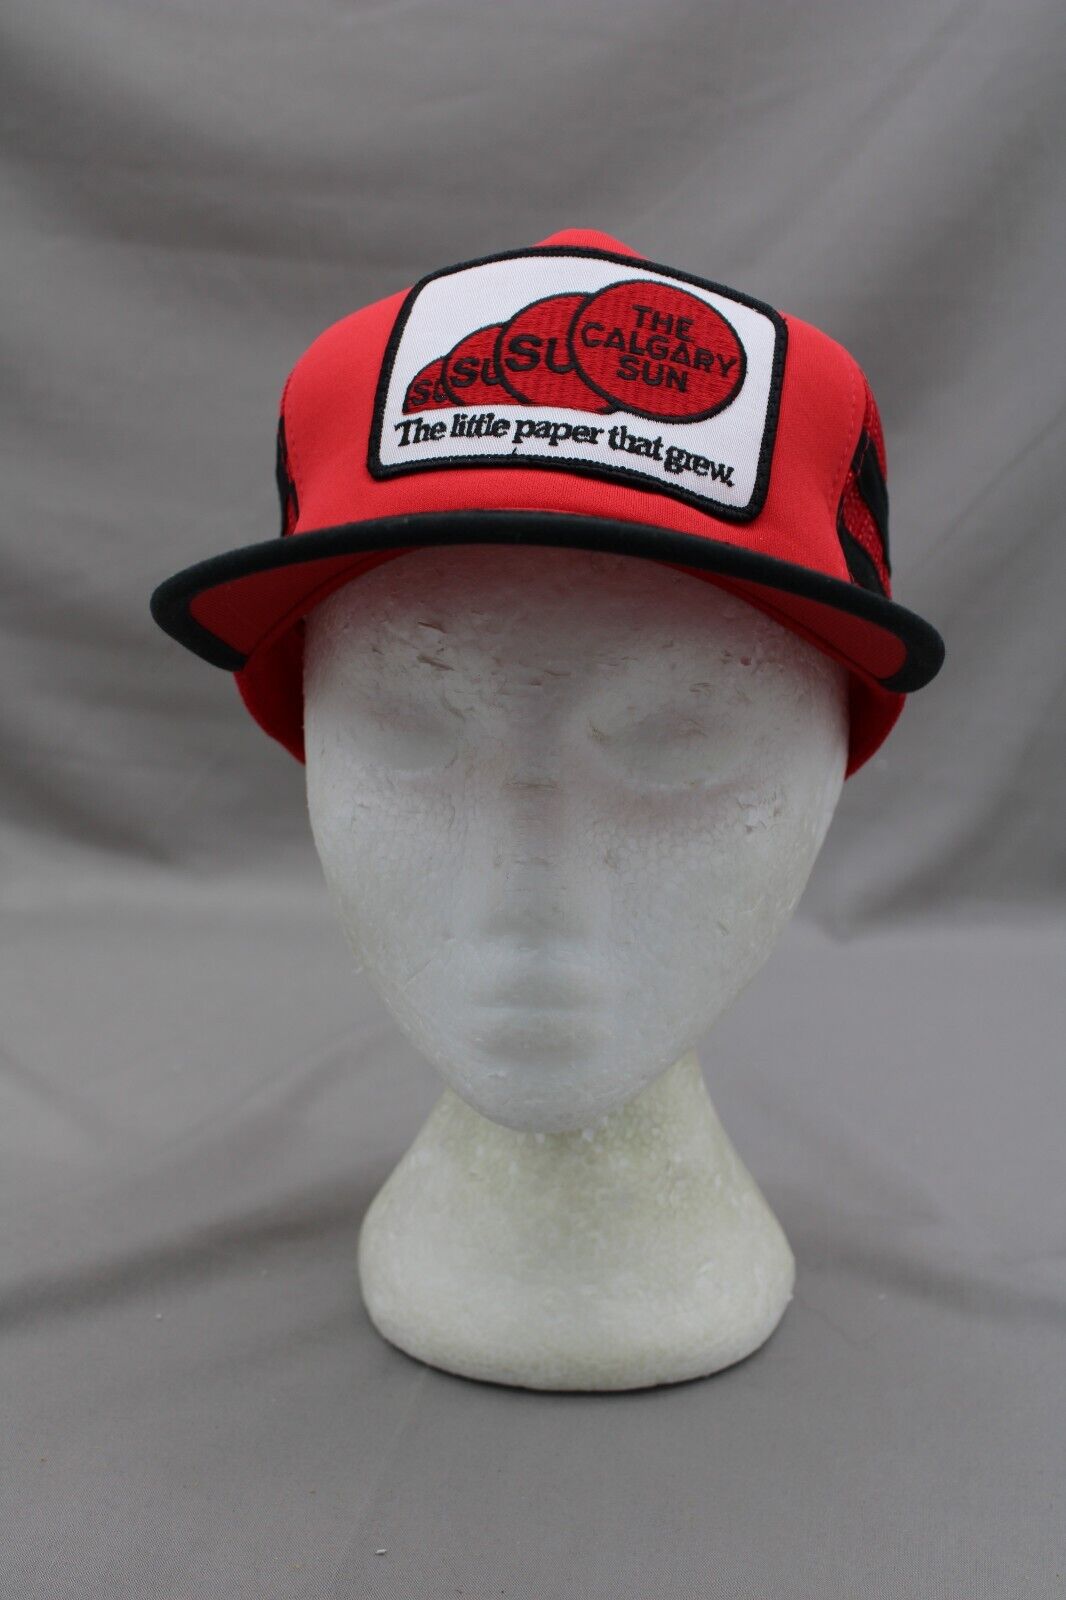 Vintage Patched Trucker Hat - Calgary Sun 3 Striper - Adult Snapback